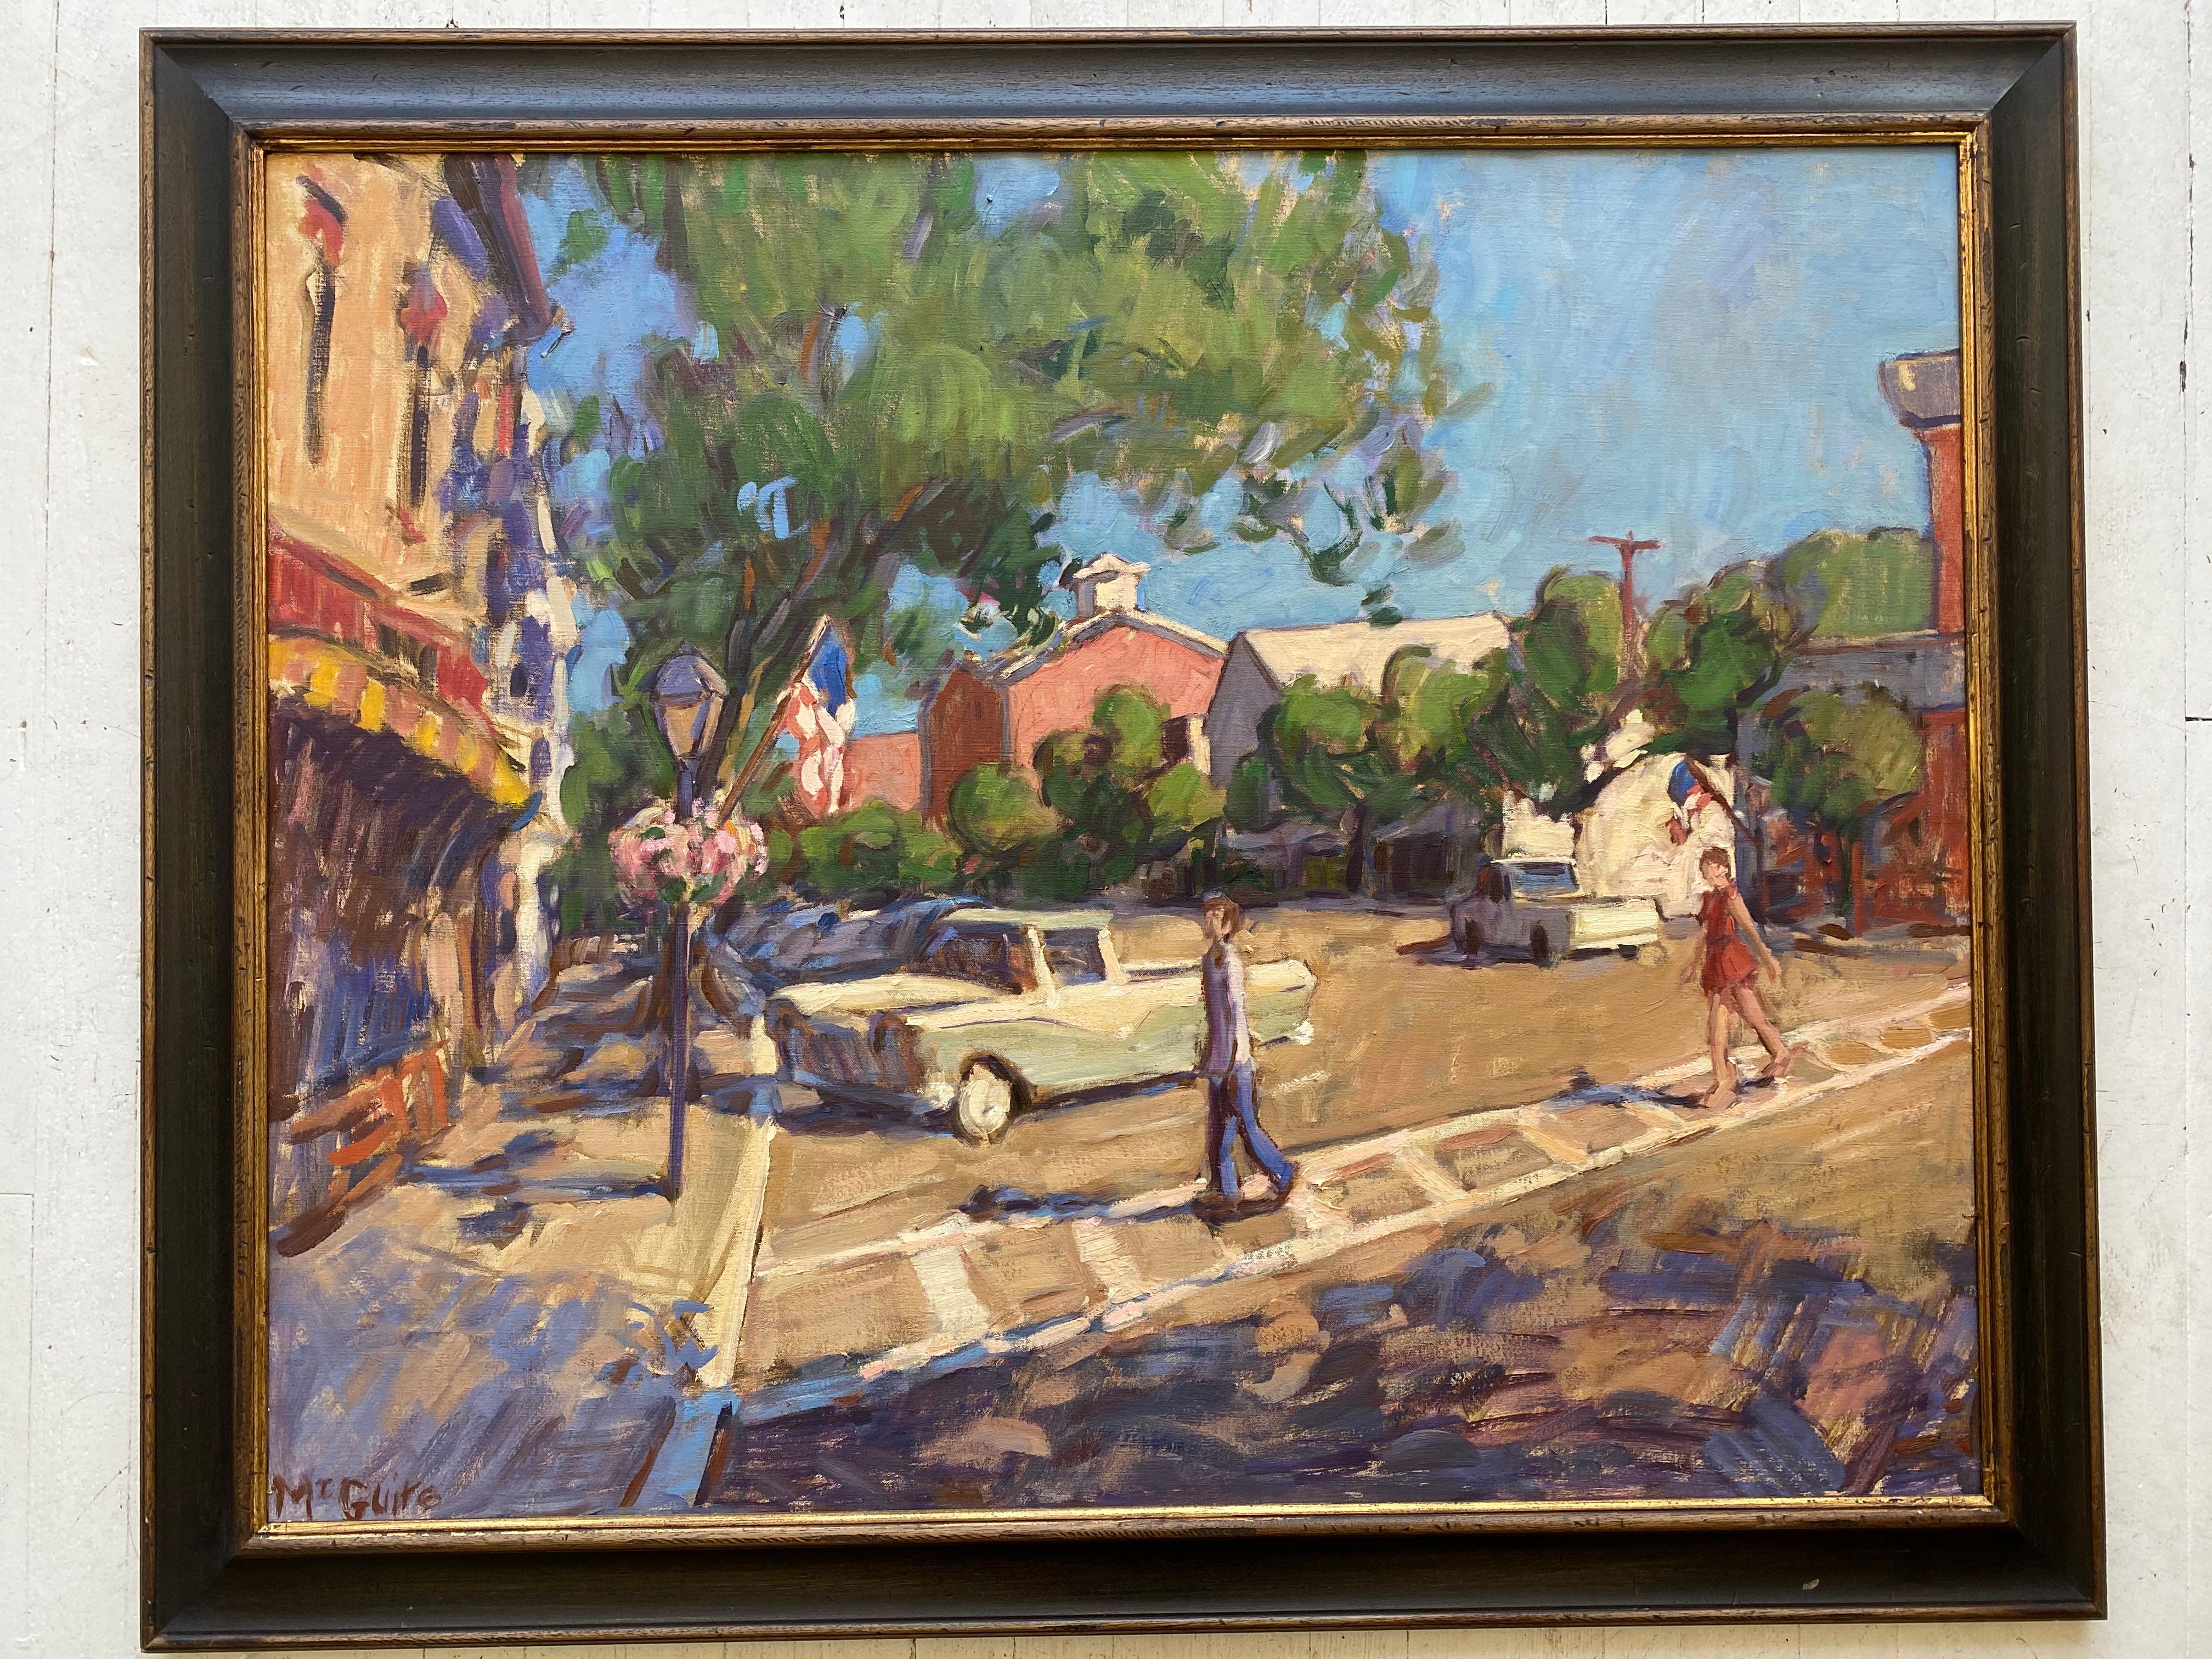 Today on Main Street - Painting by Tim McGuire